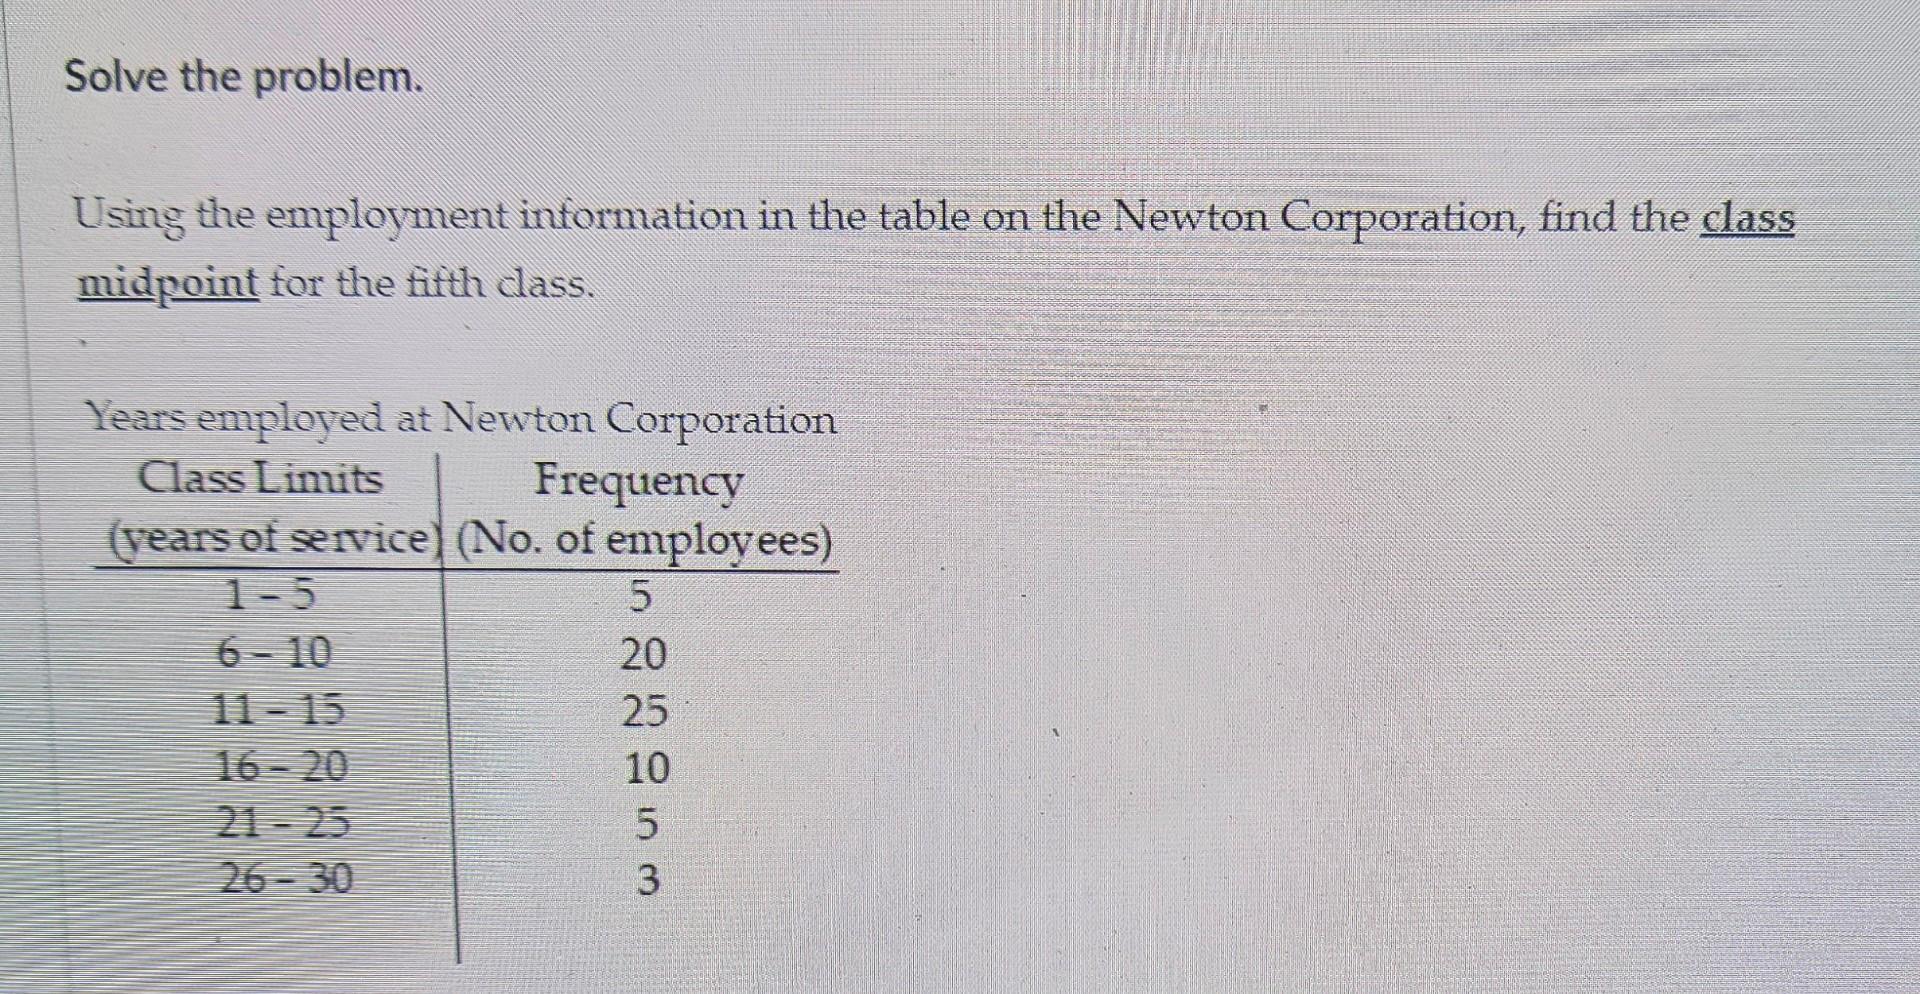 Solve the problem. Using the employment information in the table on the Newton Corporation, find the class